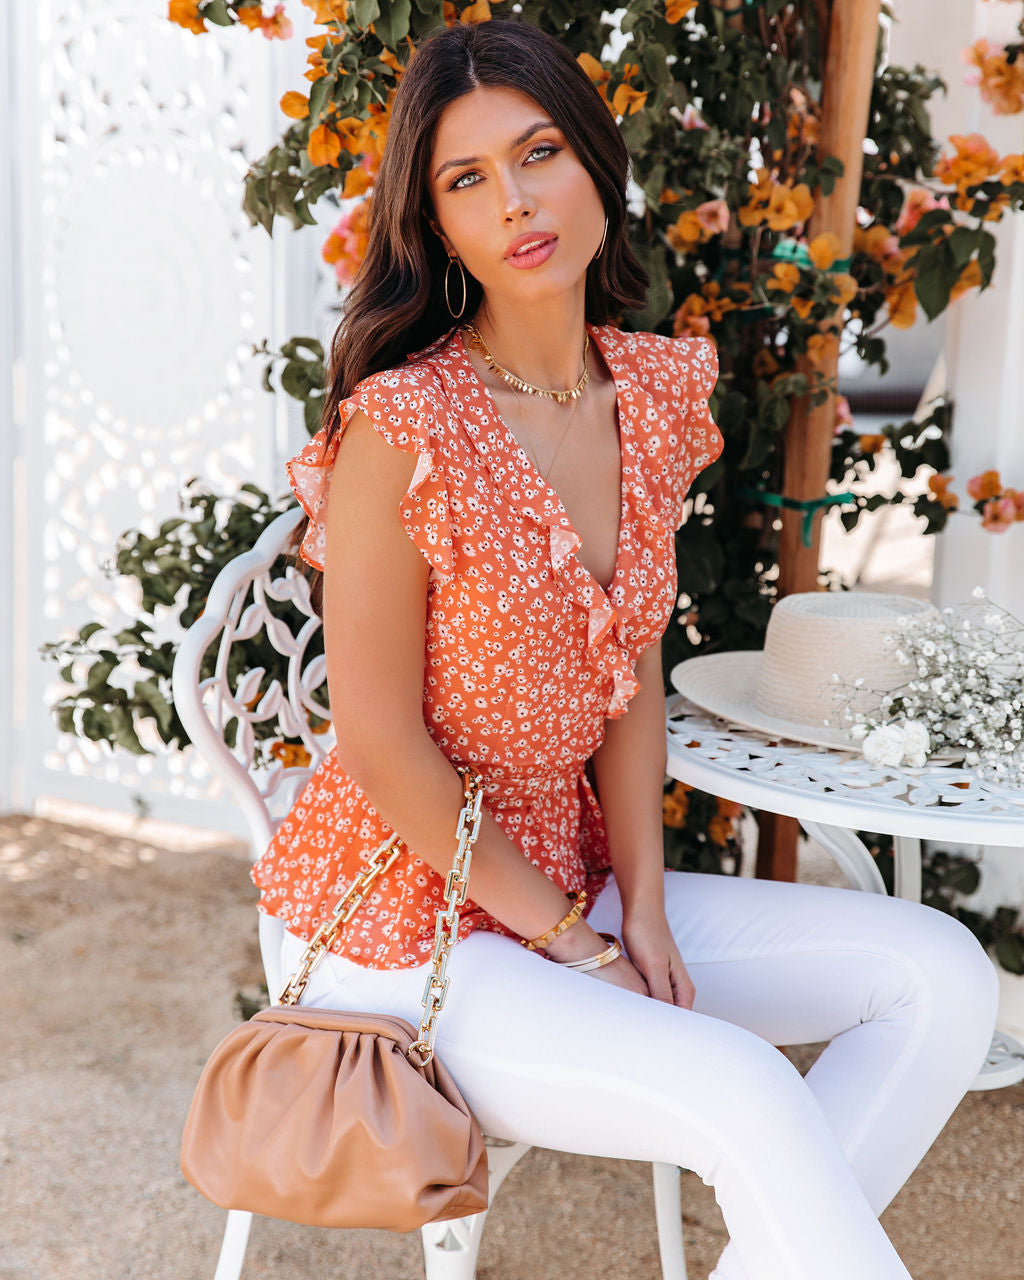 Hot Summer Nights Floral Ruffle Blouse - FINAL SALE Ins Street